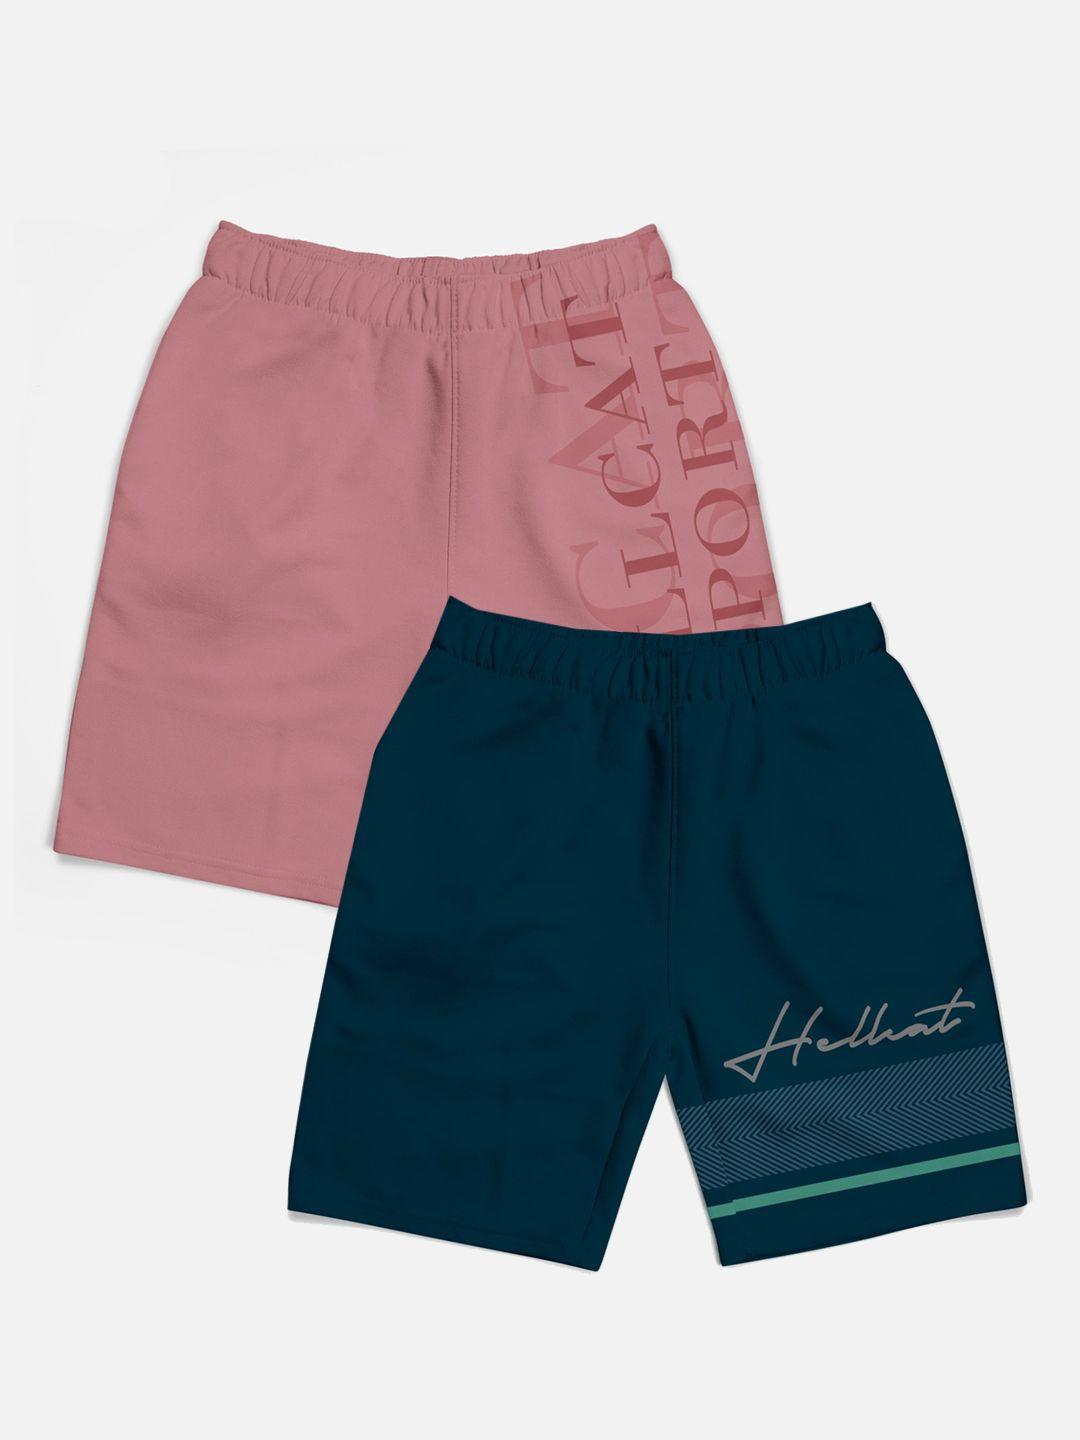 hellcat boys pack of 2 printed cotton shorts